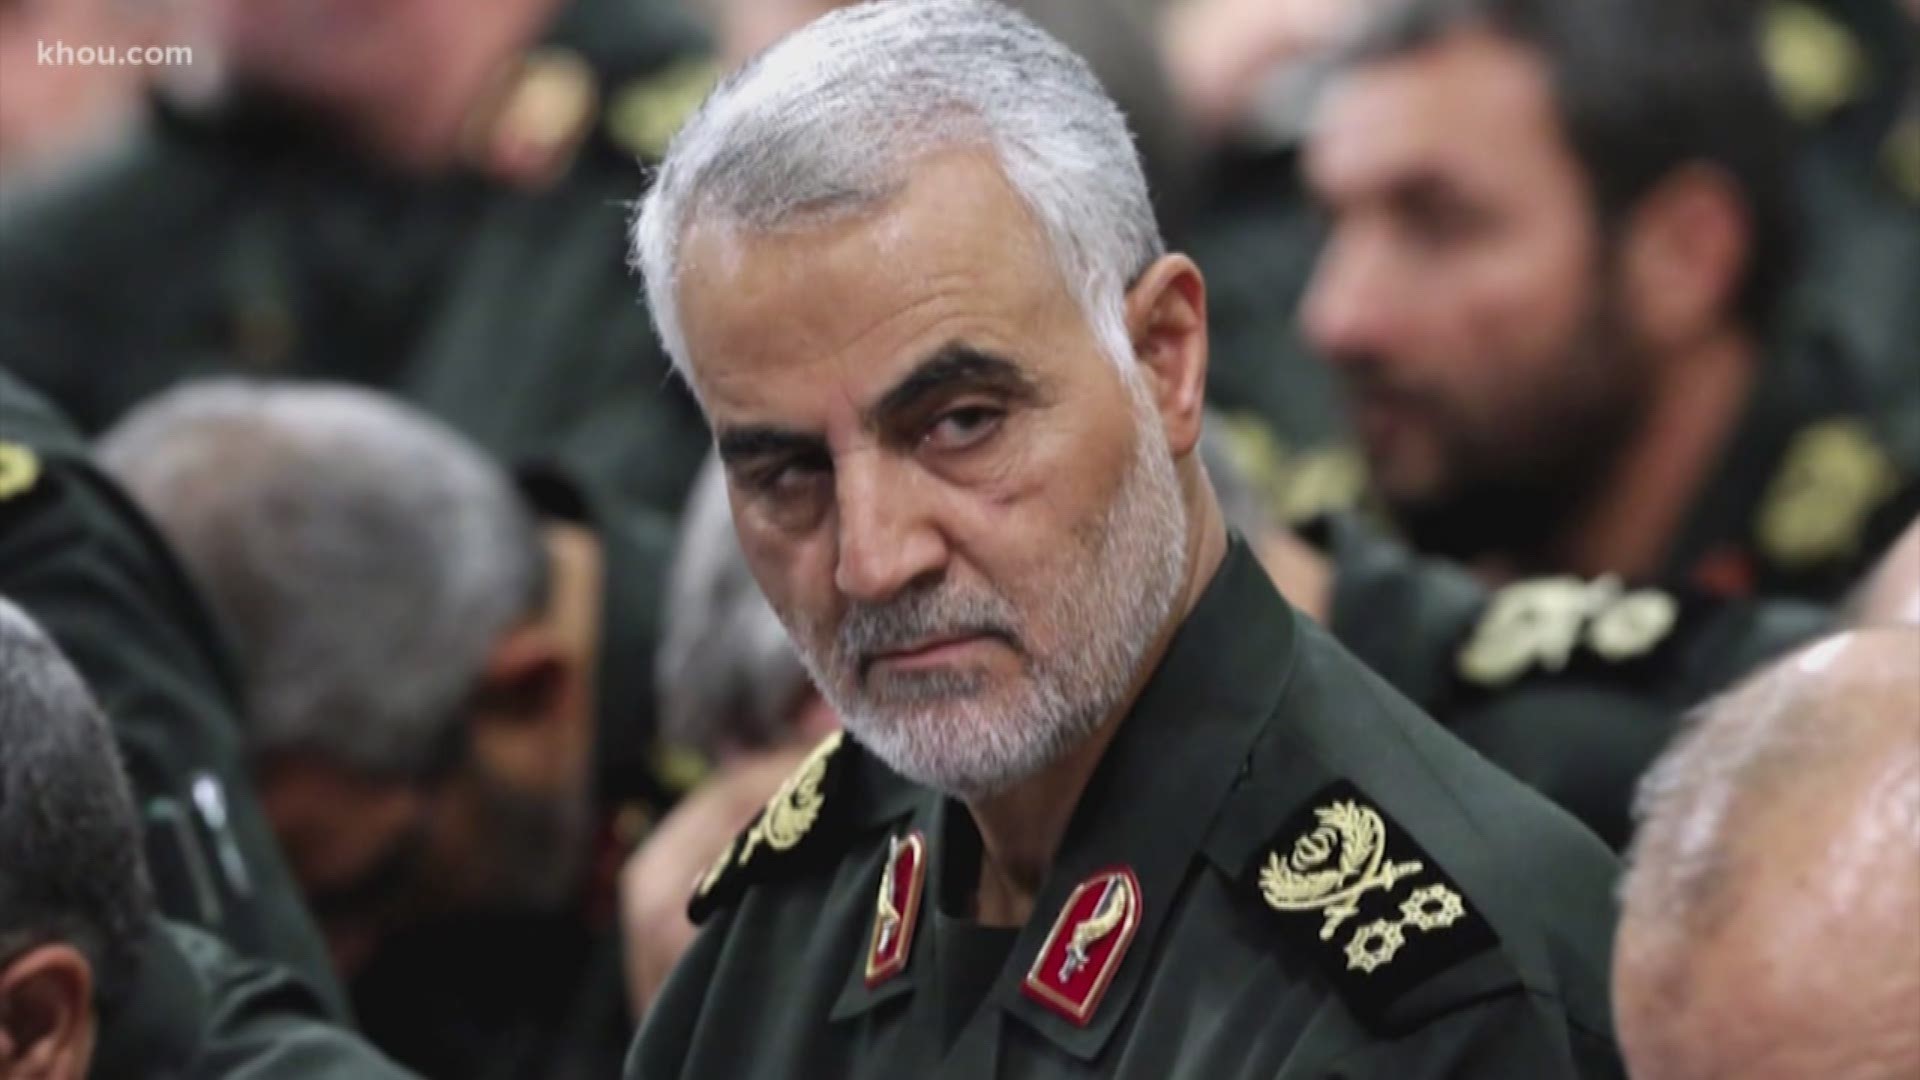 The Pentagon says the U.S. military has killed Gen. Qassem Soleimani, the head of Iran's elite Quds Force, at the direction of President Donald Trump.